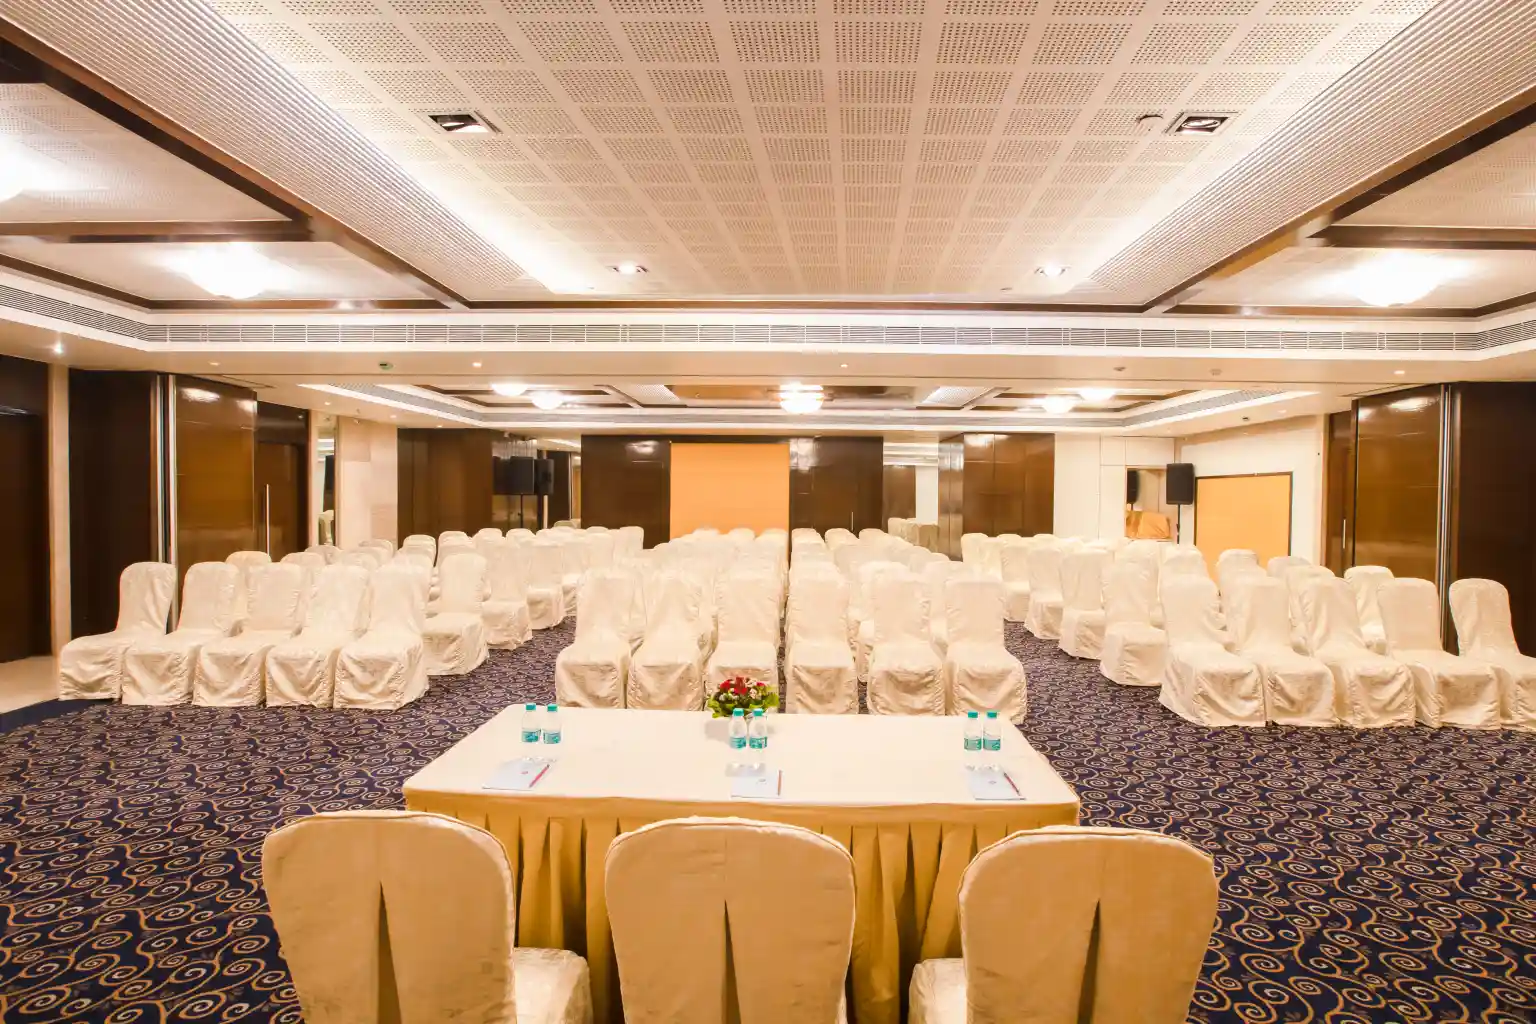 Imperial-banquet-hall-in-pune-at-ramee-grand-hotel-on-apte-road